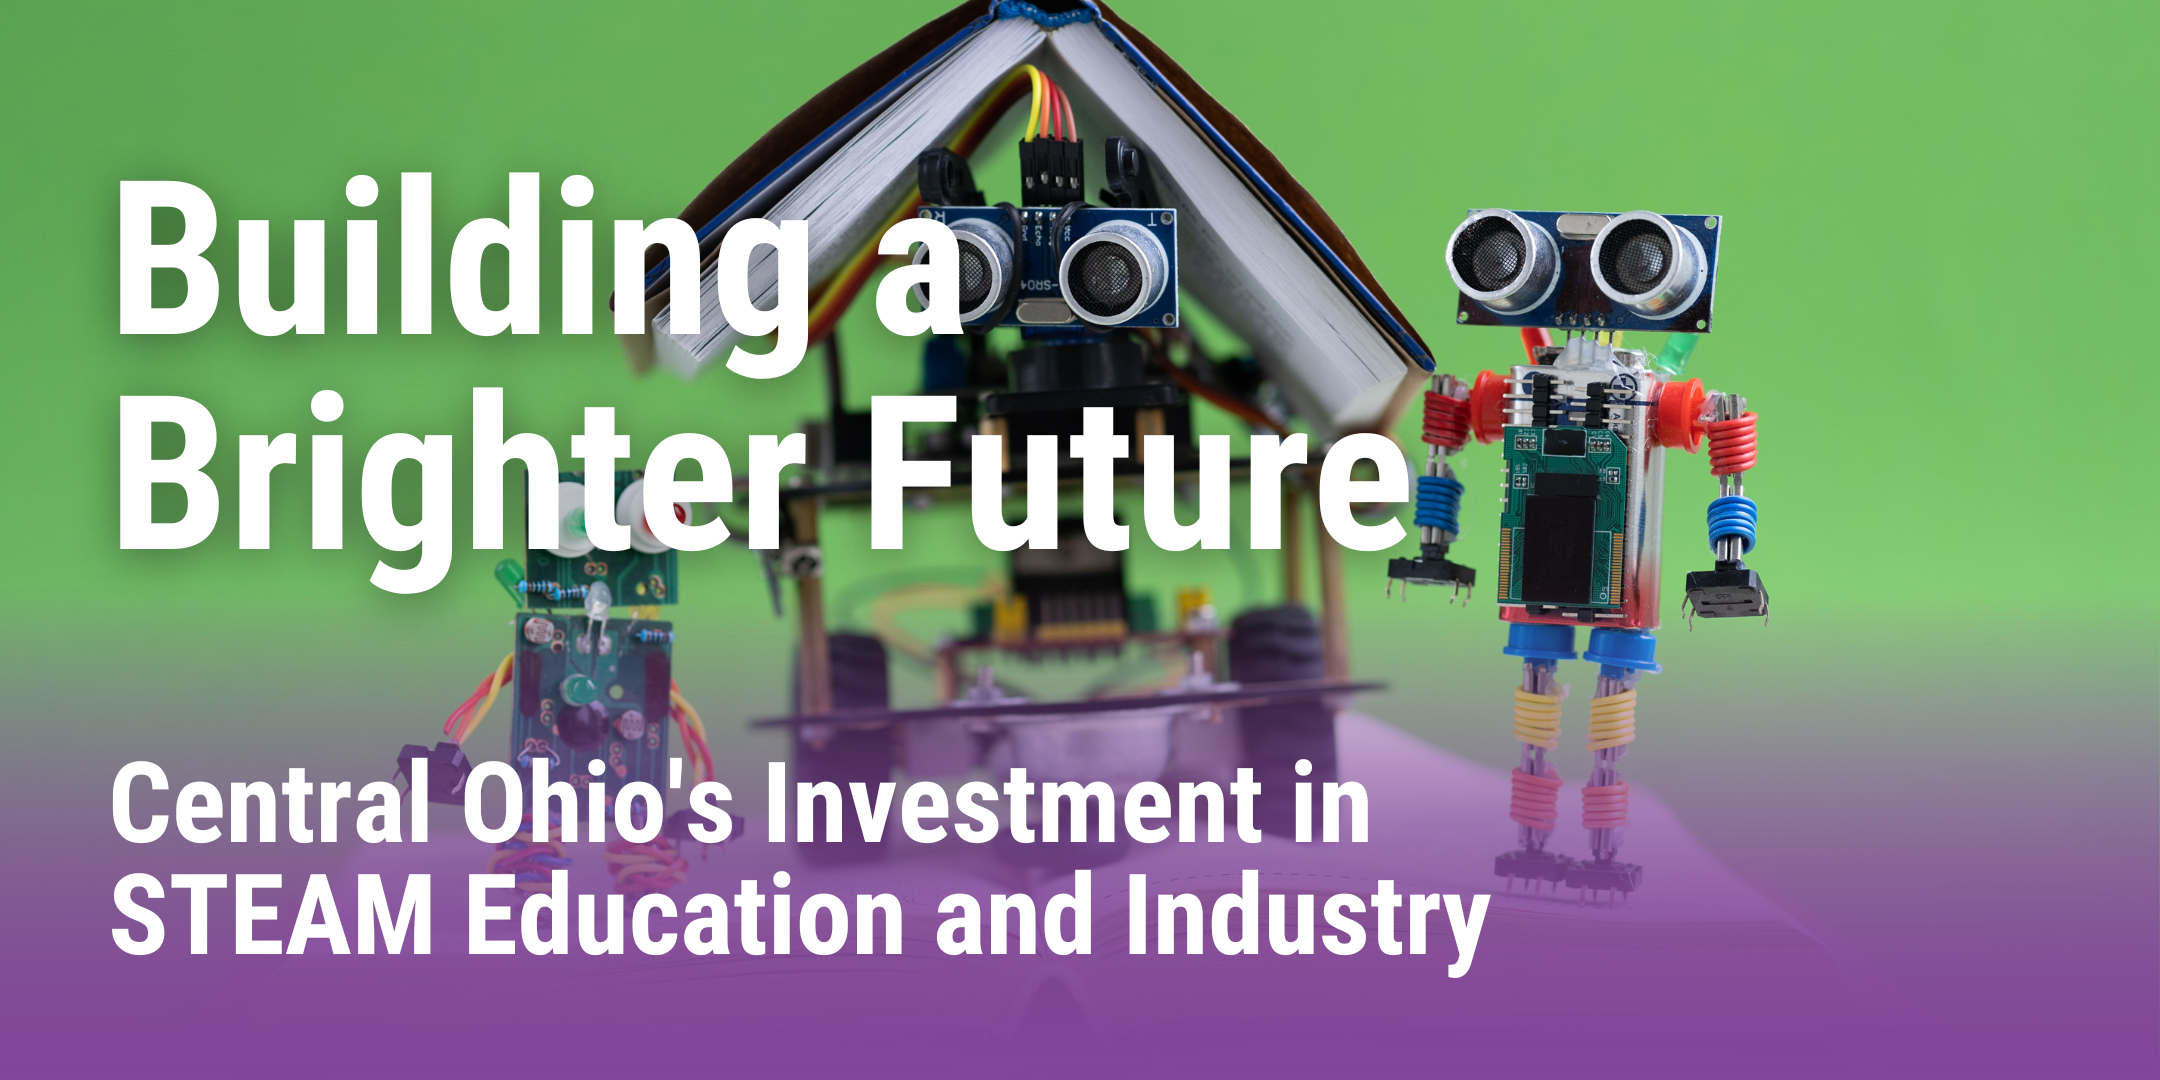 Green and purple banner with imagery of books and robots. Displays blog title "Building a Brighter Future- Central Ohio’s Investment in STEAM Education and Industry".